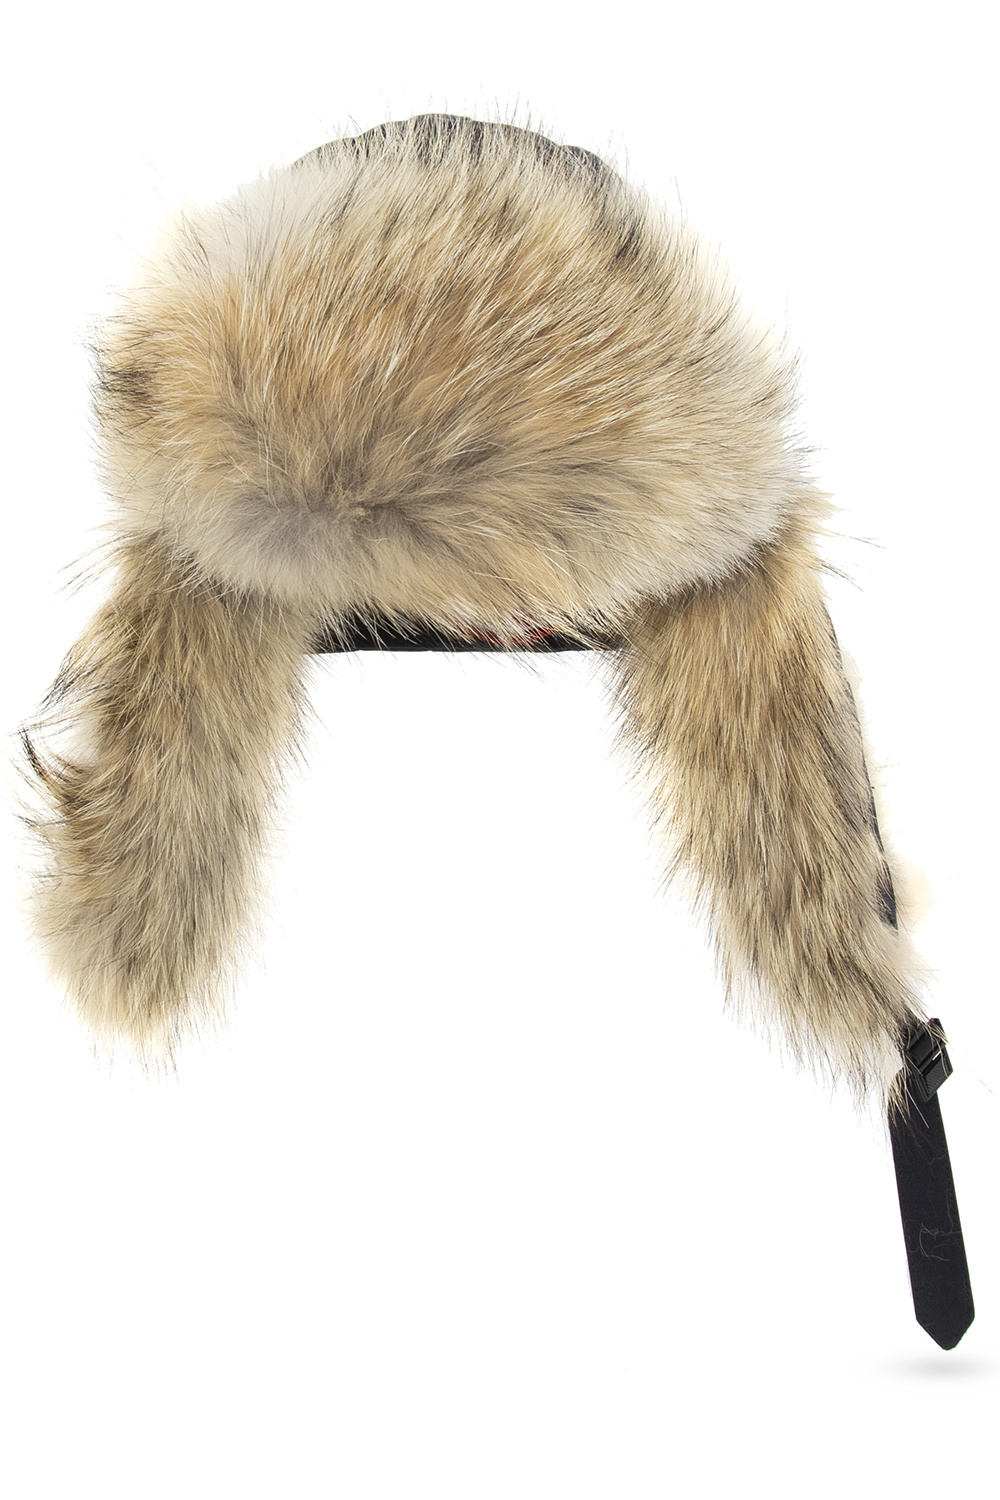 Canada Goose Hat with earmuffs